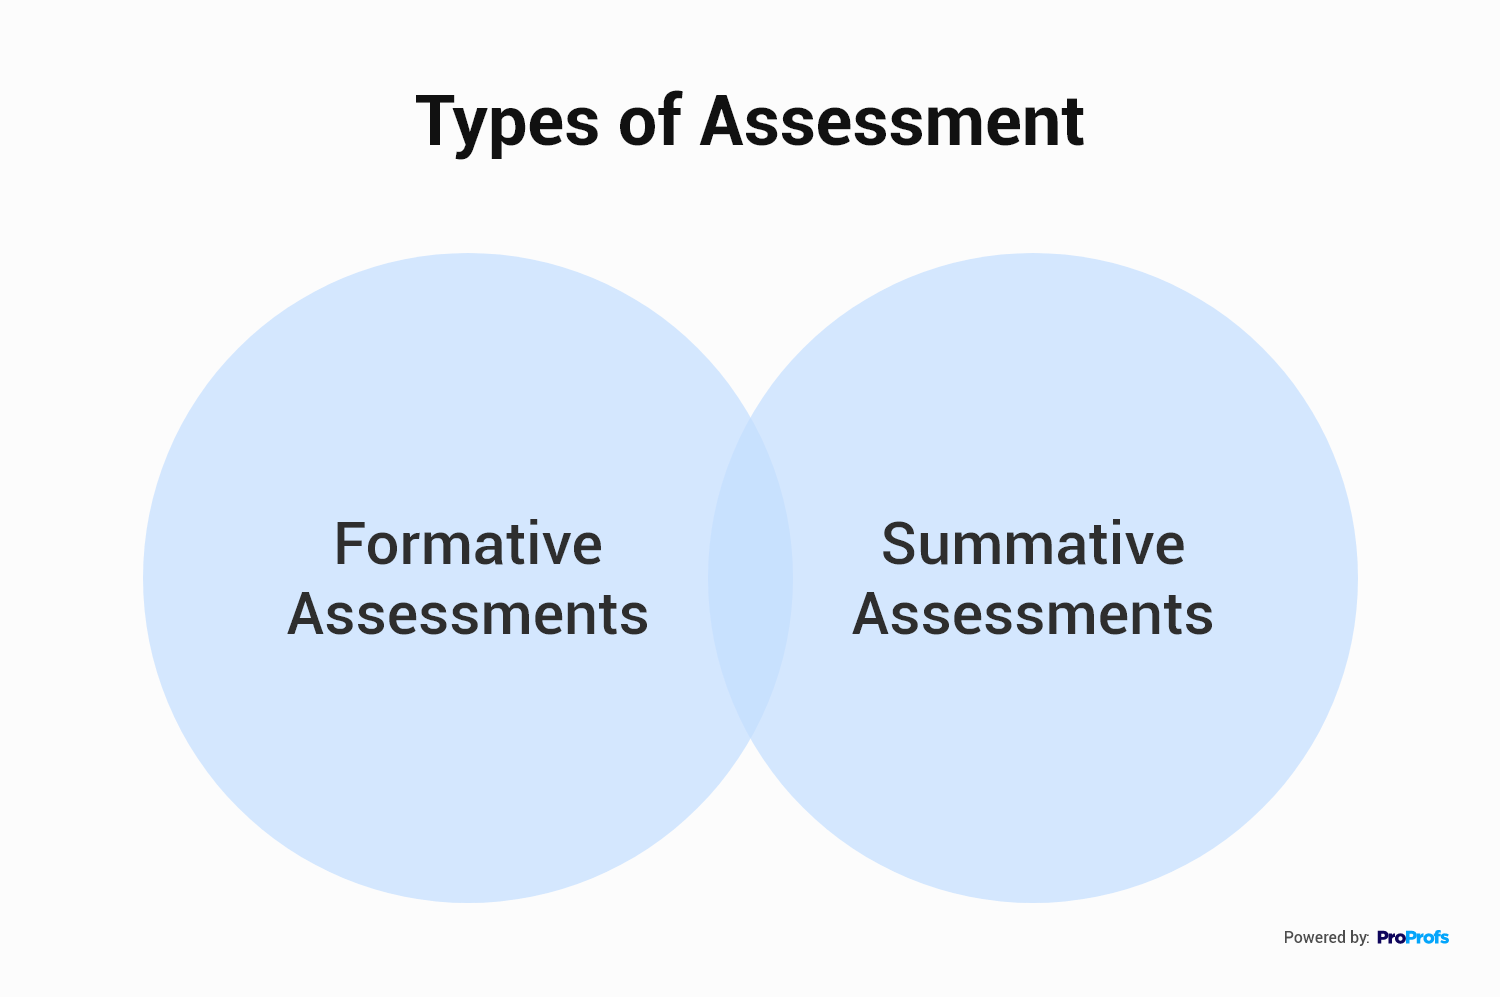 Similarities Between Formative and Summative Assessments